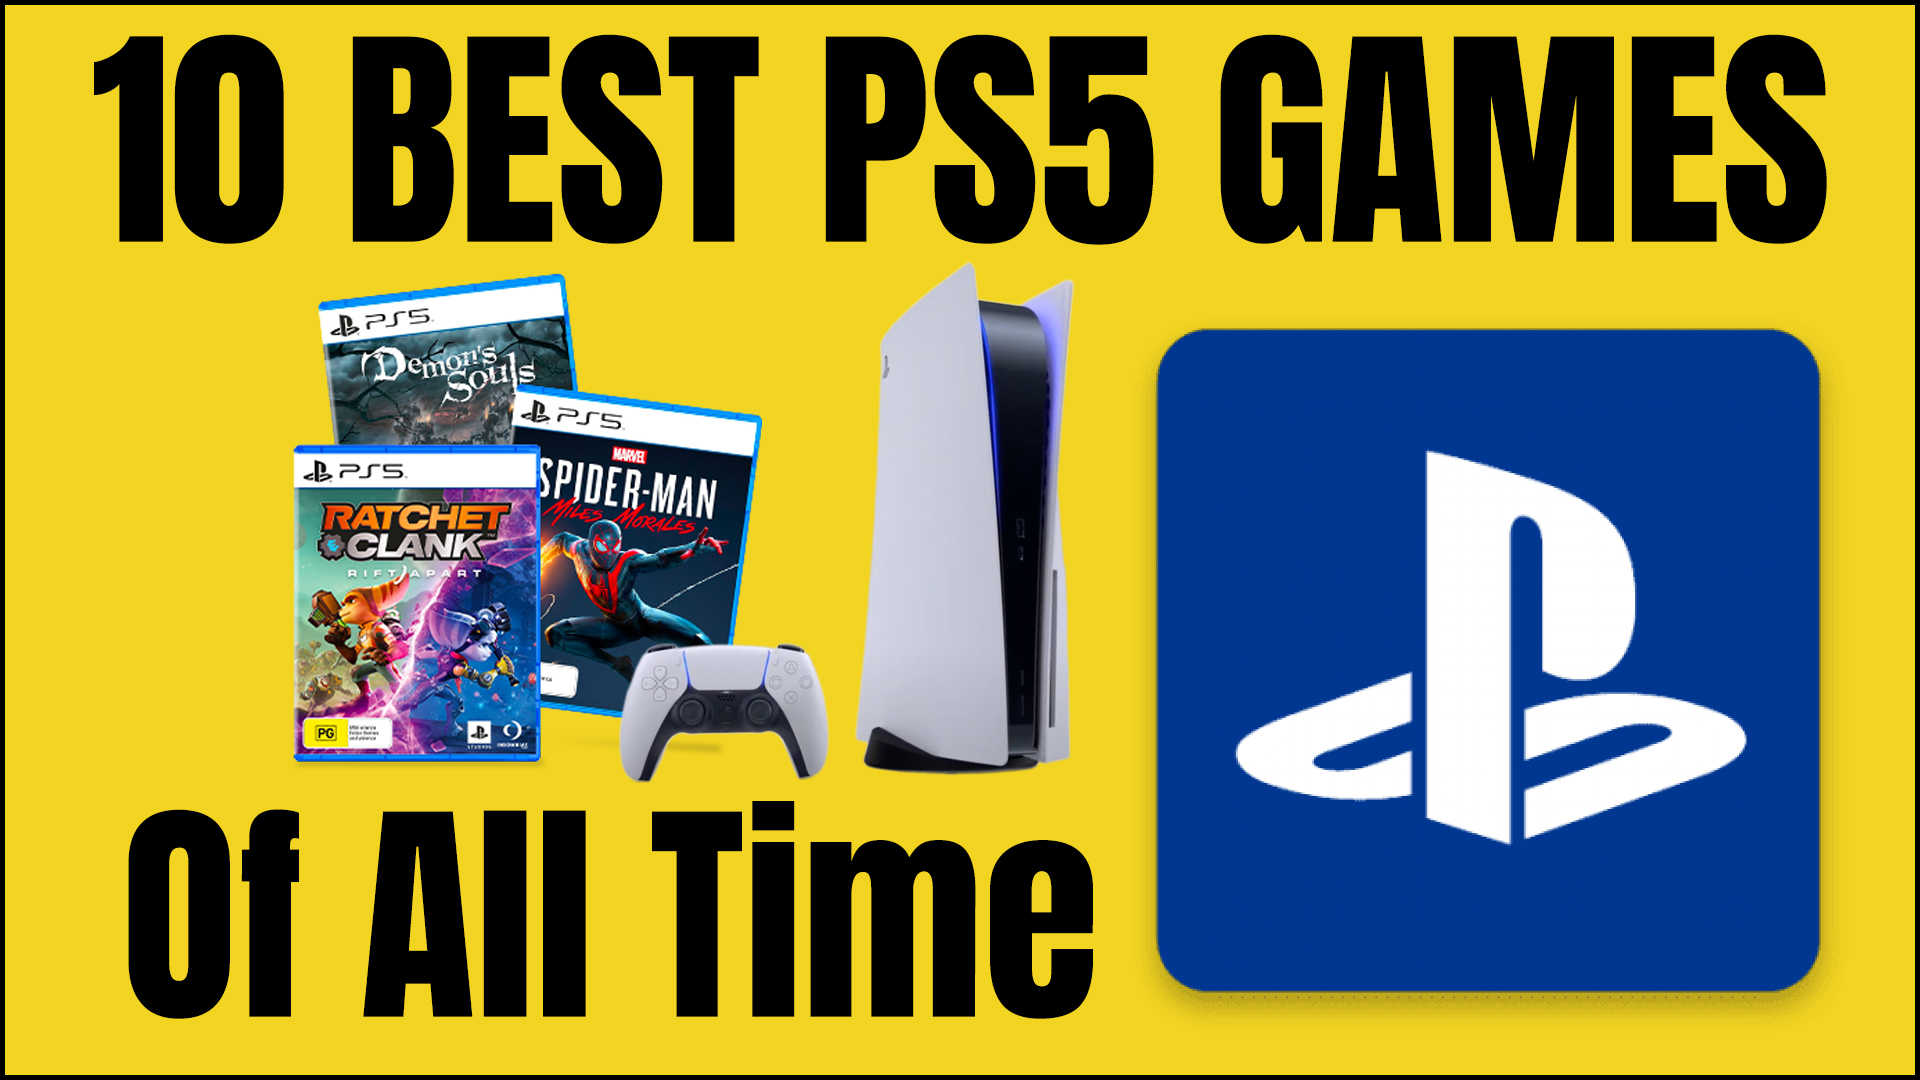 10 Best PS5 Games of All Time